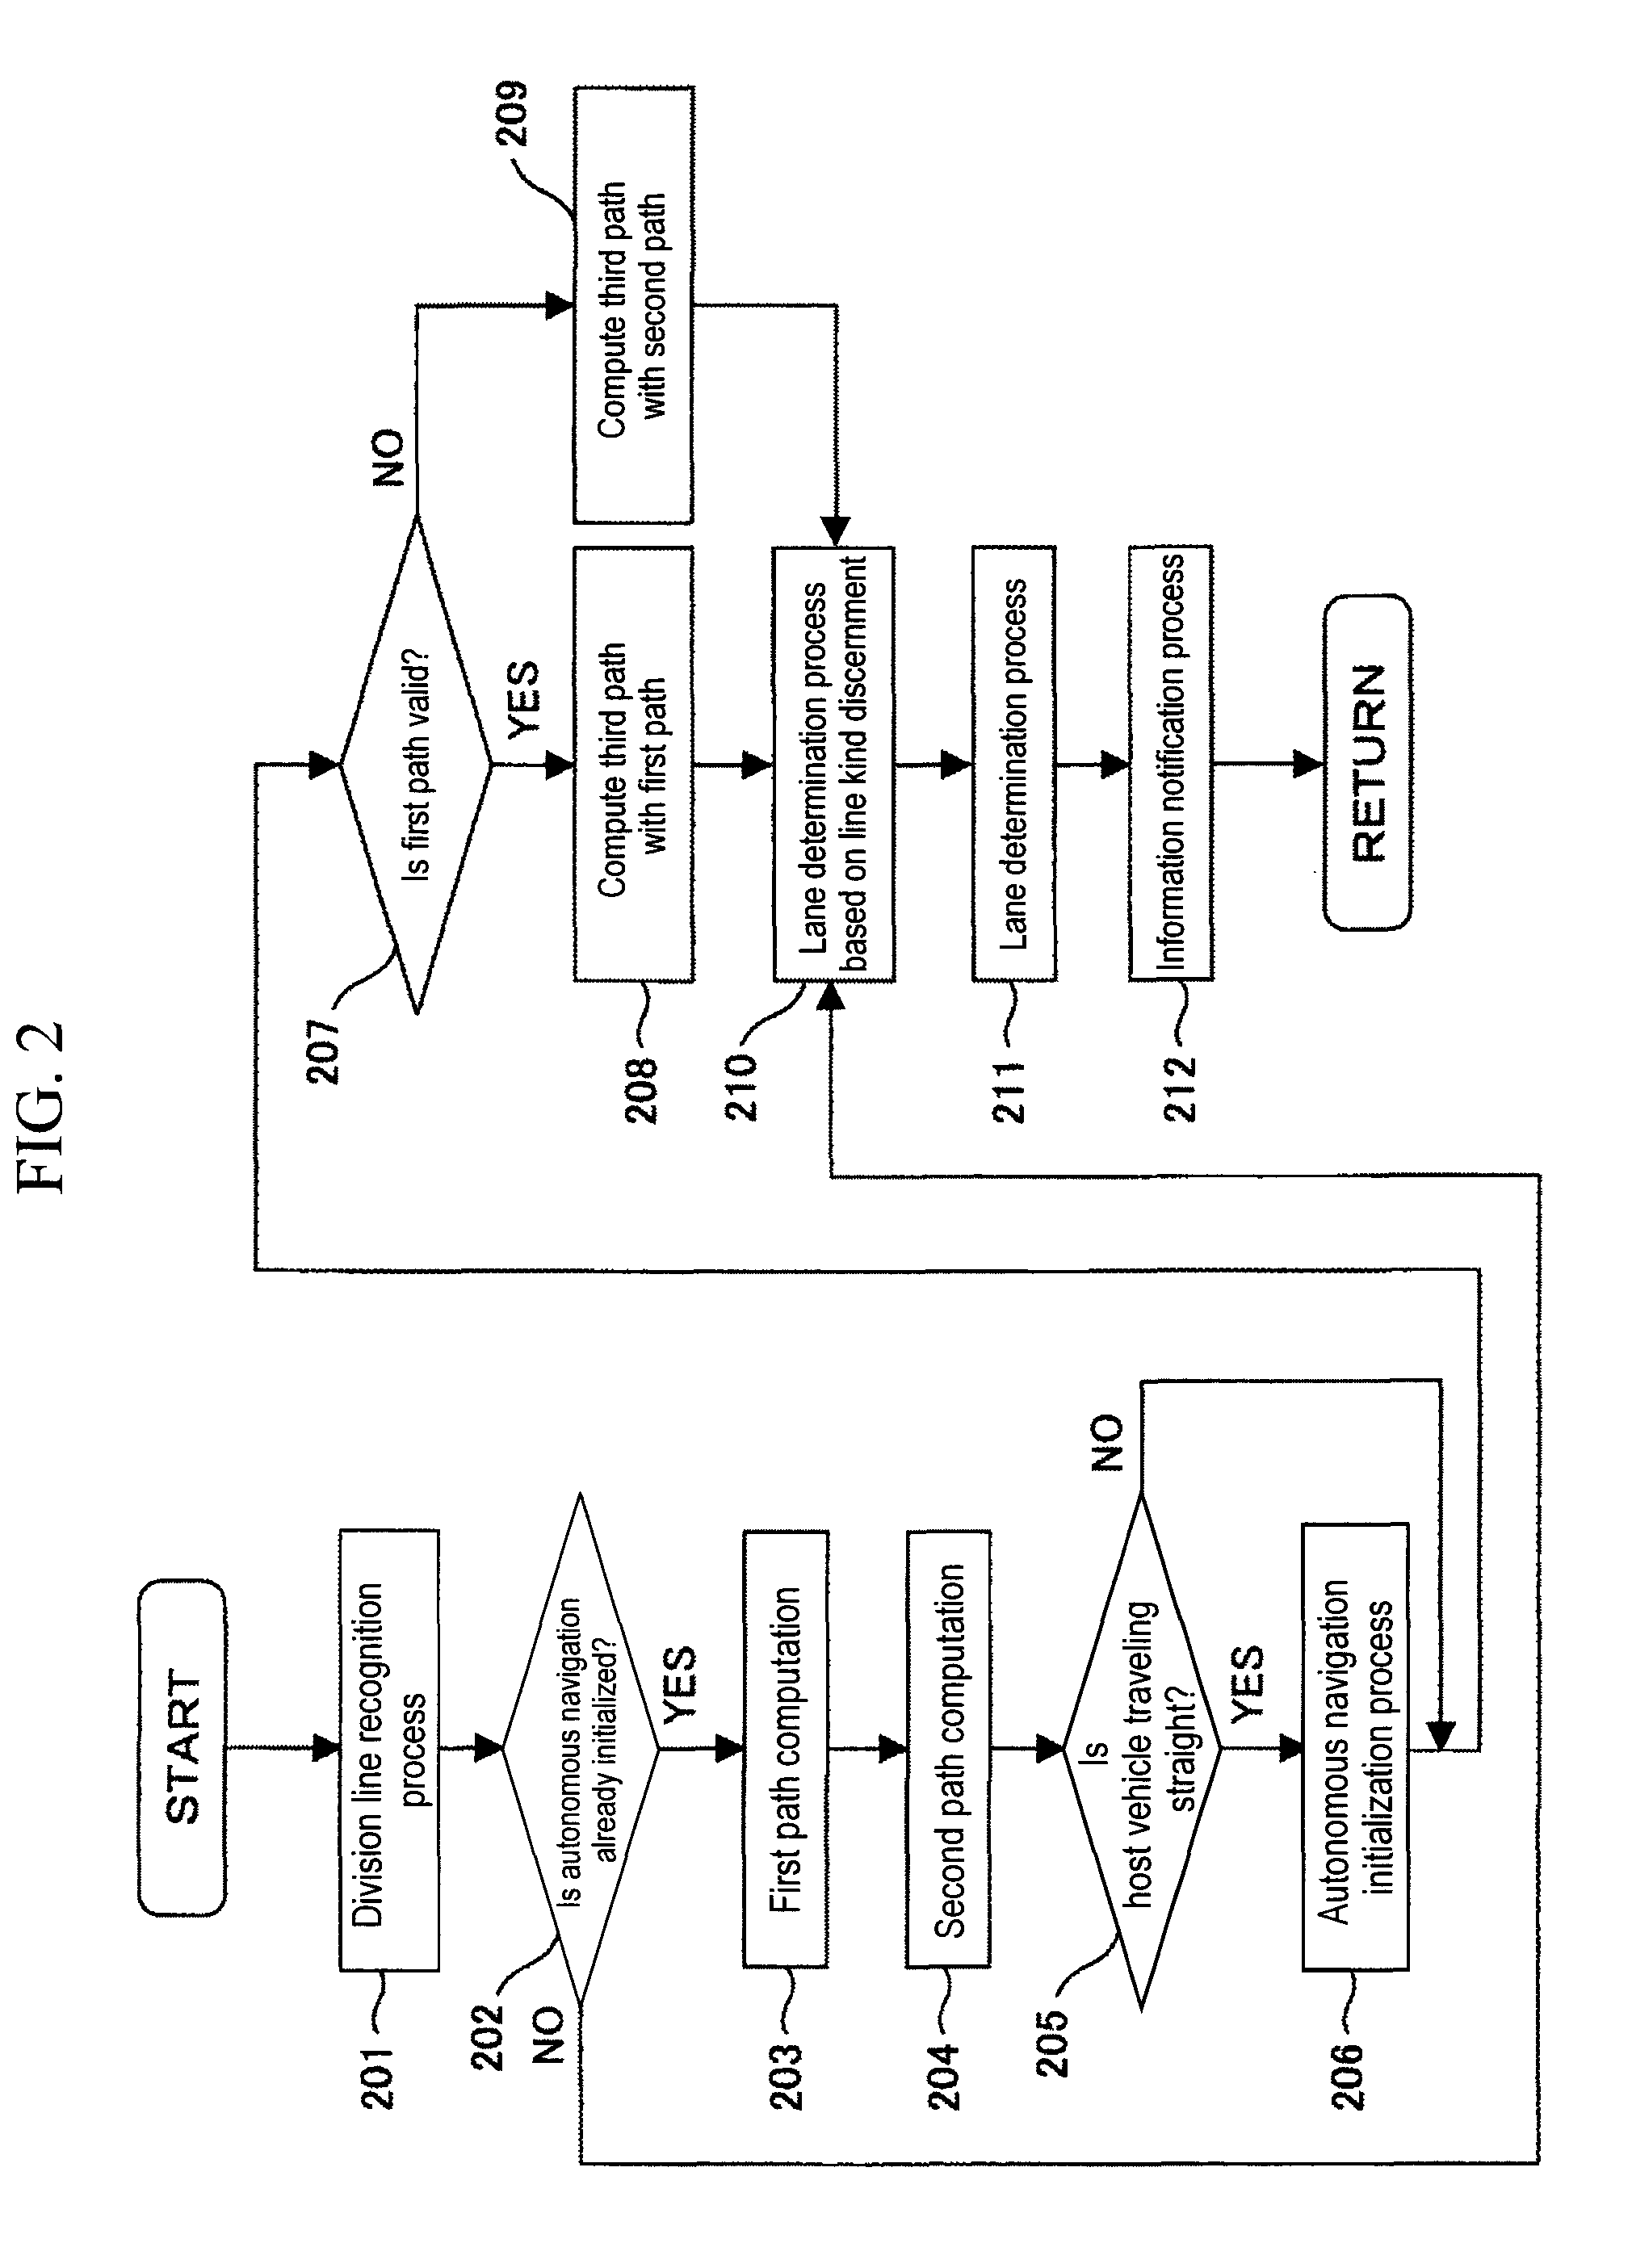 Lane determining device and navigation system